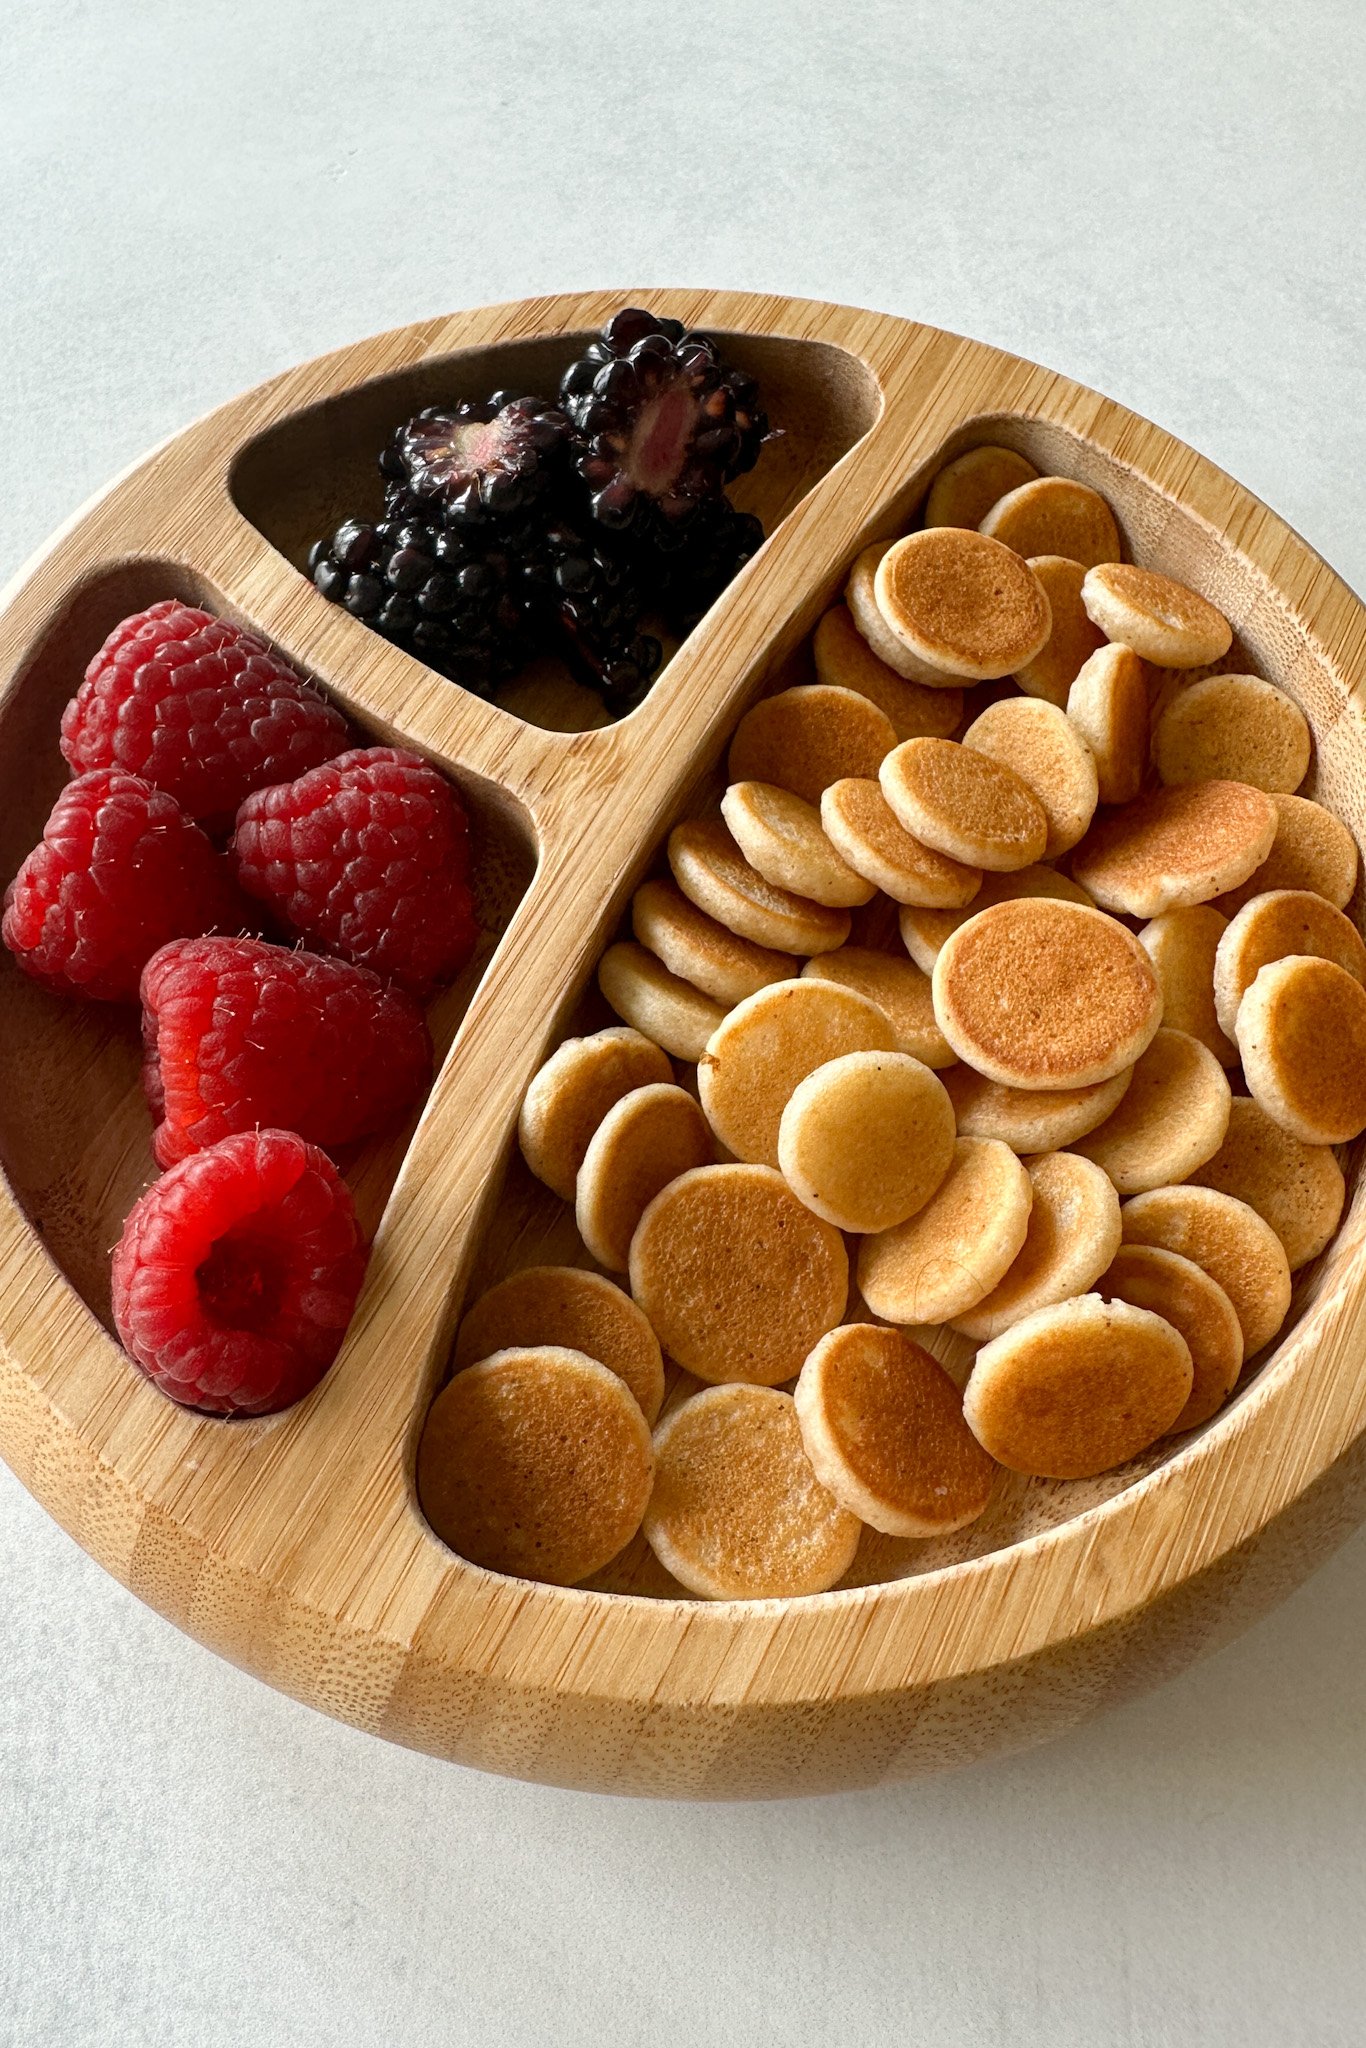 Egg free pancake cereal served with fruits.